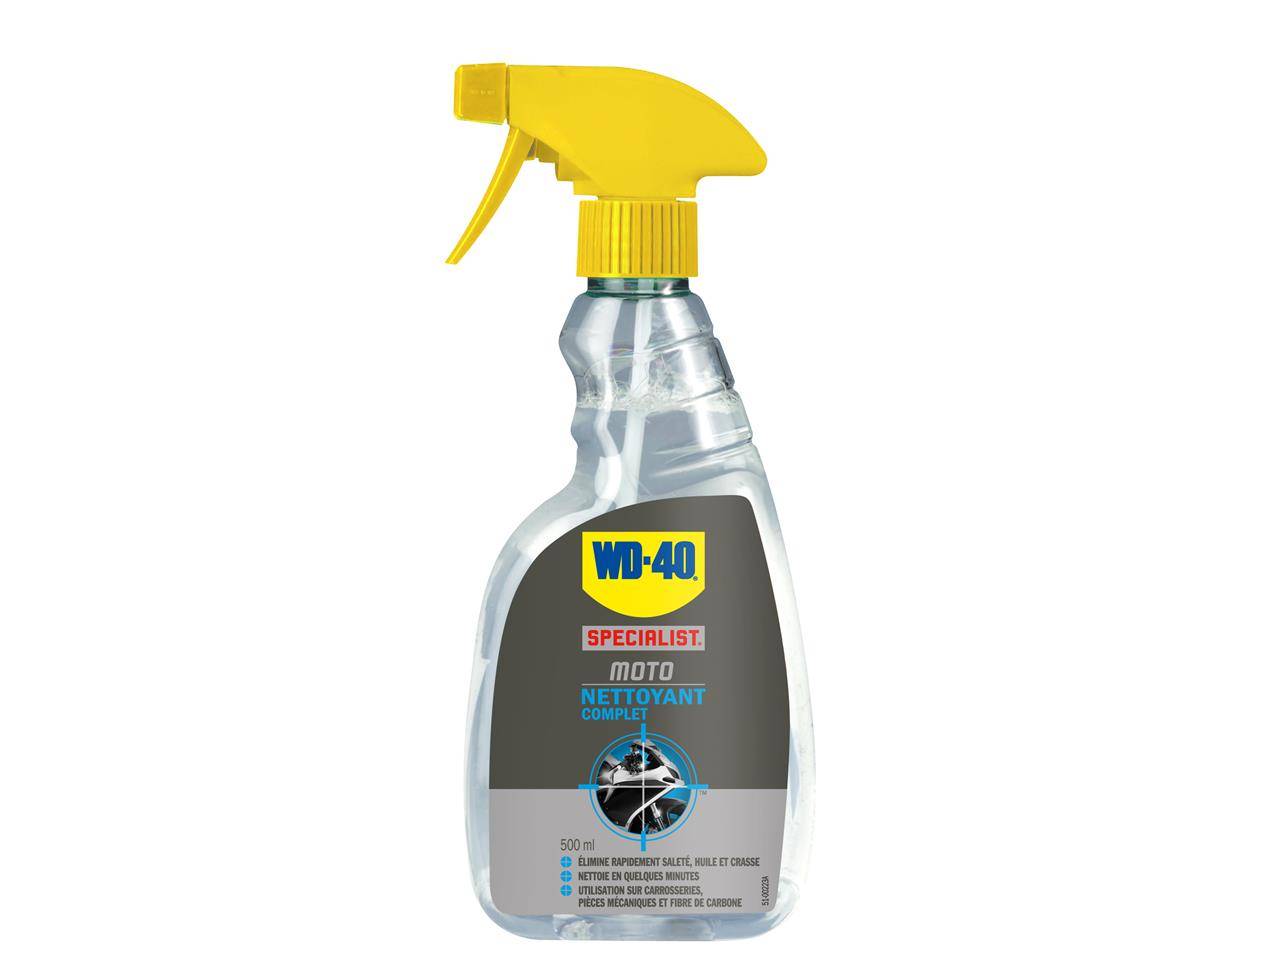 Nettoyant complet WD-40 Specialist Moto Wash spray